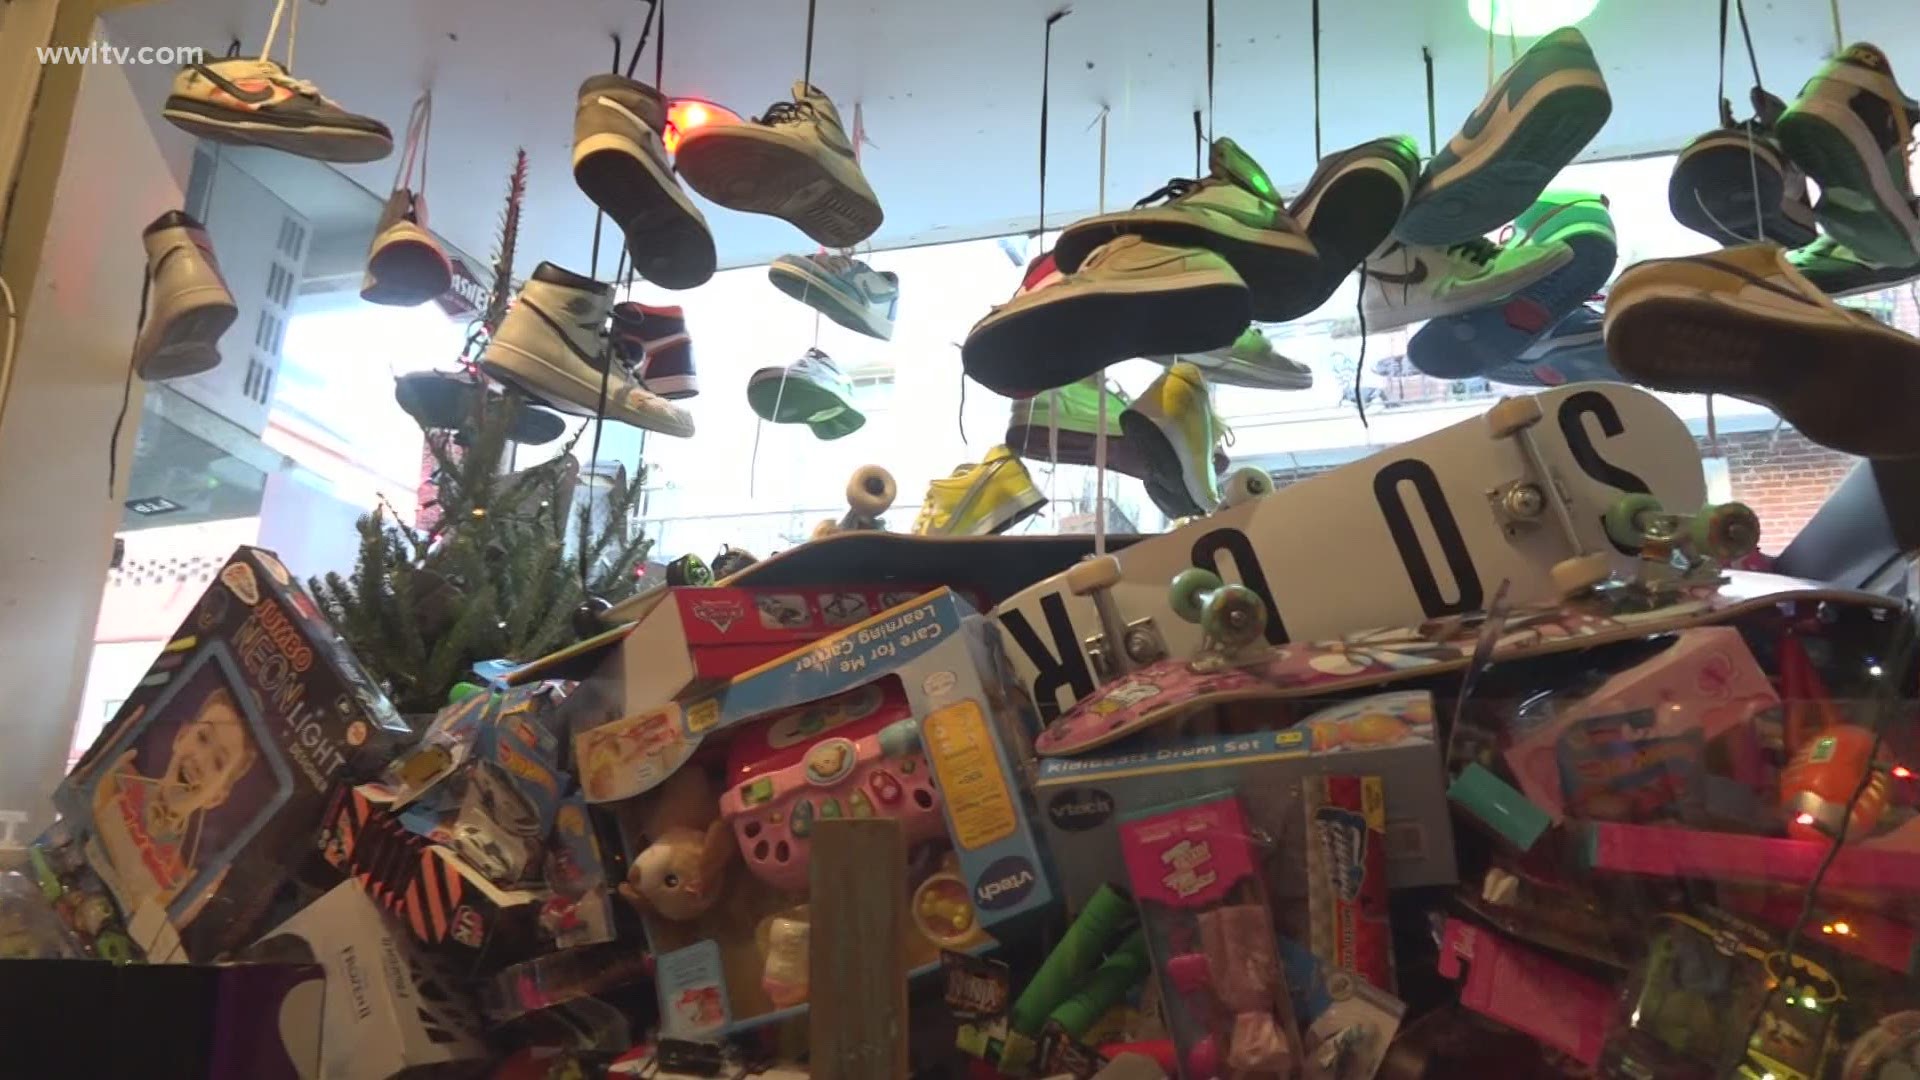 Humidity Skate shop is helping less fortunate kids around New Orleans celebrate Christmas by hosting a toy drive.